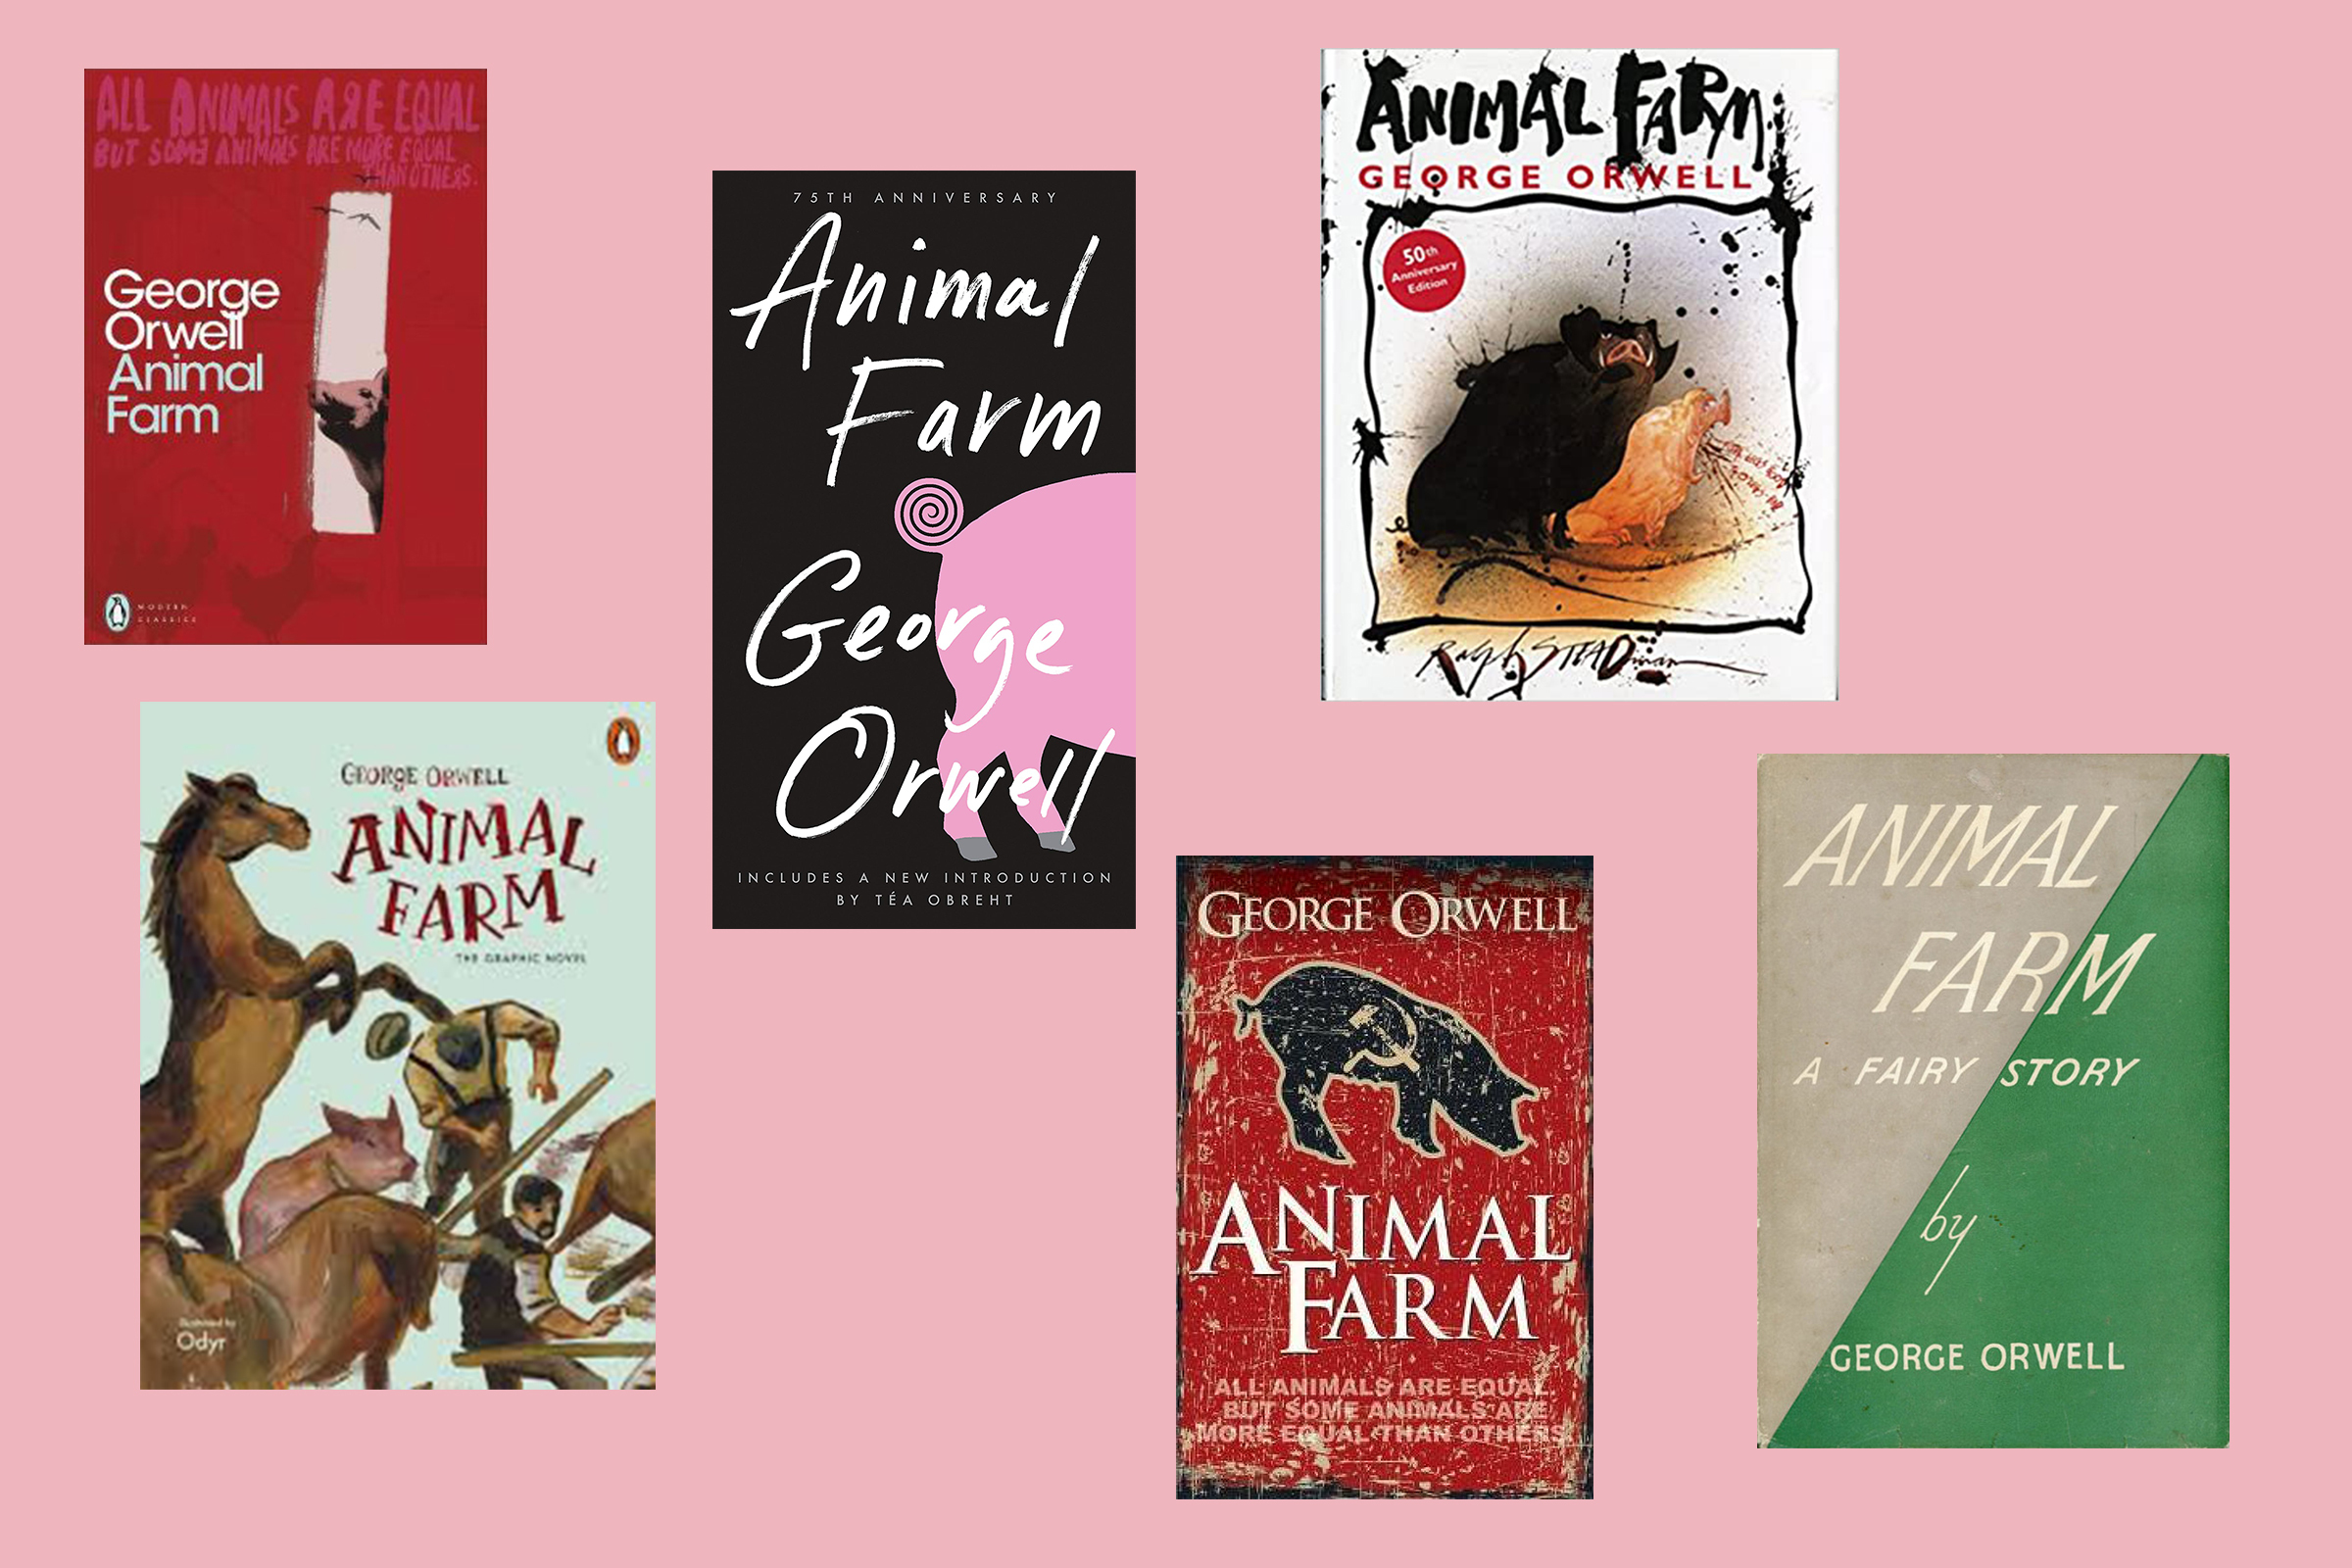 Animal Farm 75th Anniversary: Relevance in 2020 | Time